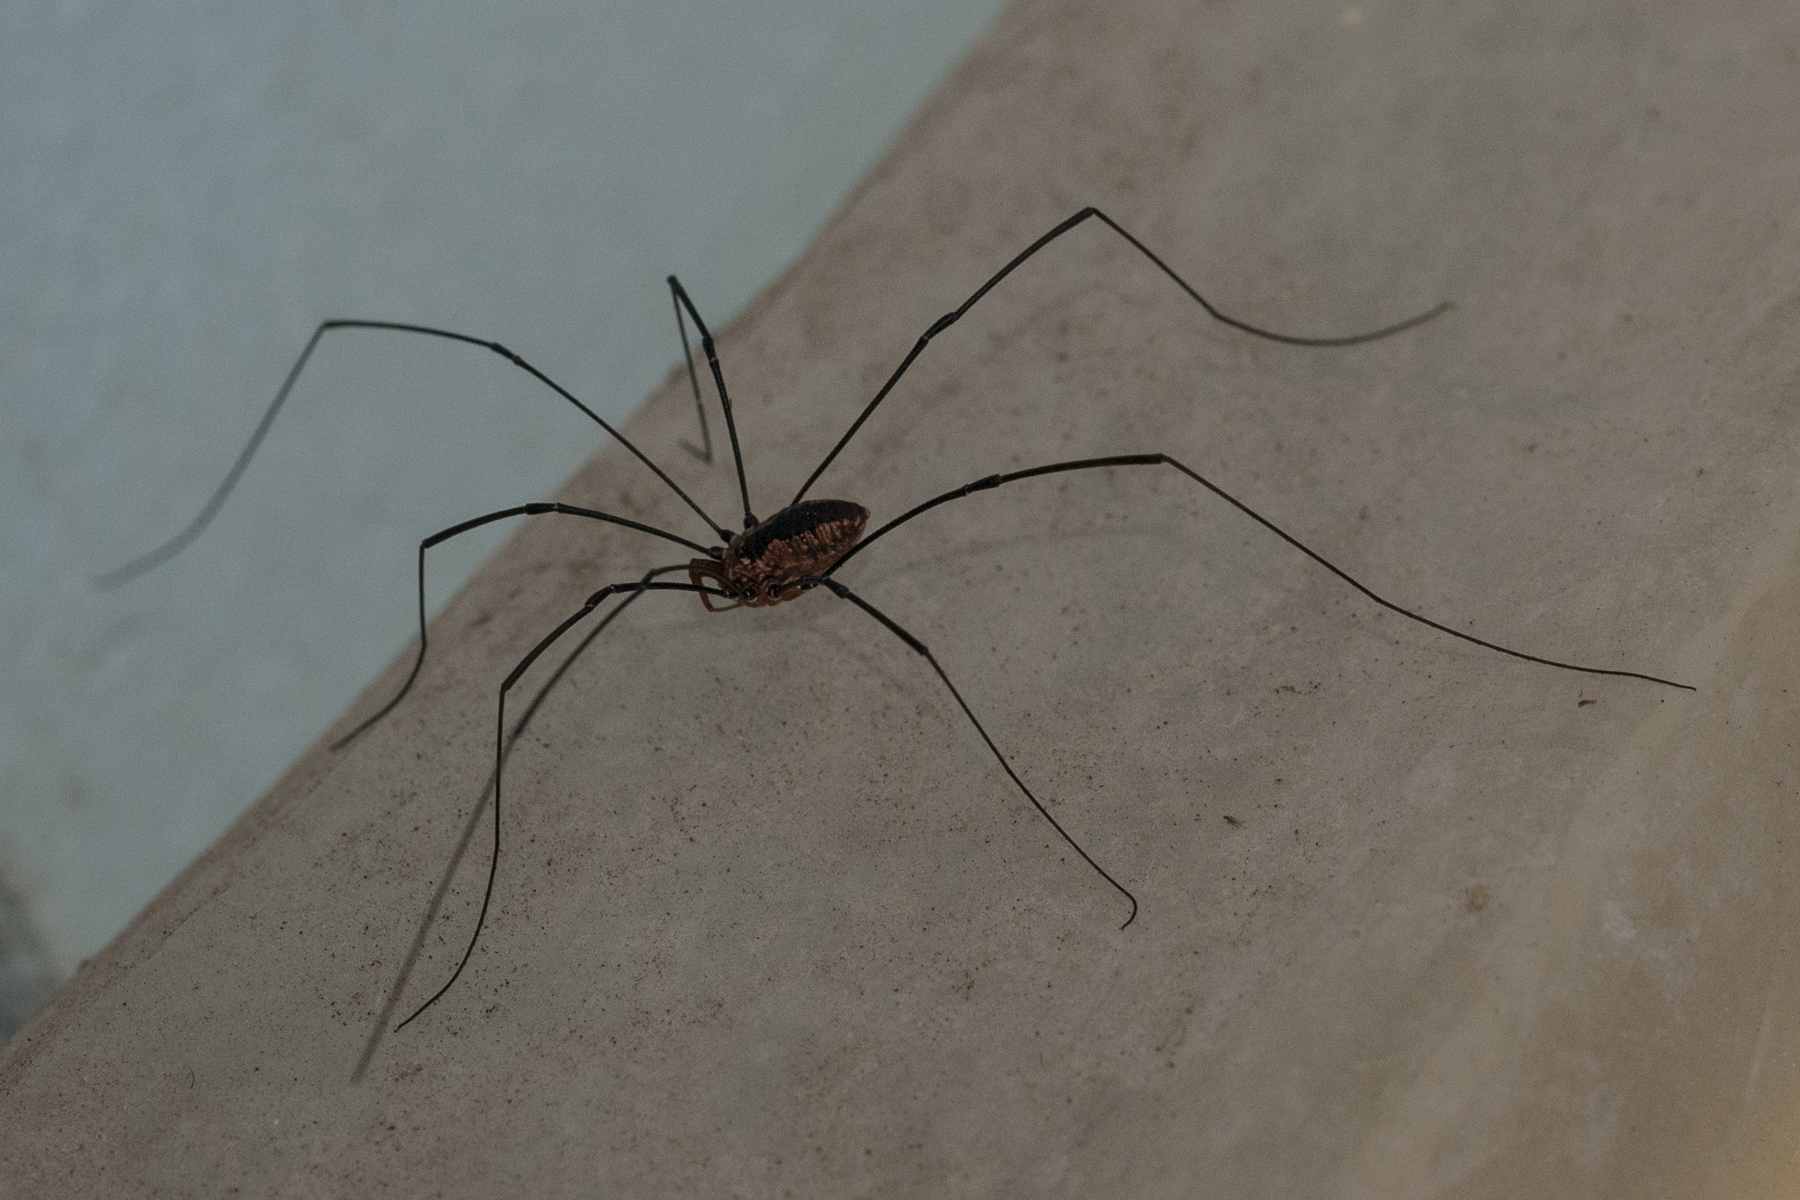 Daddy Longlegs: Spiders & Other Critters